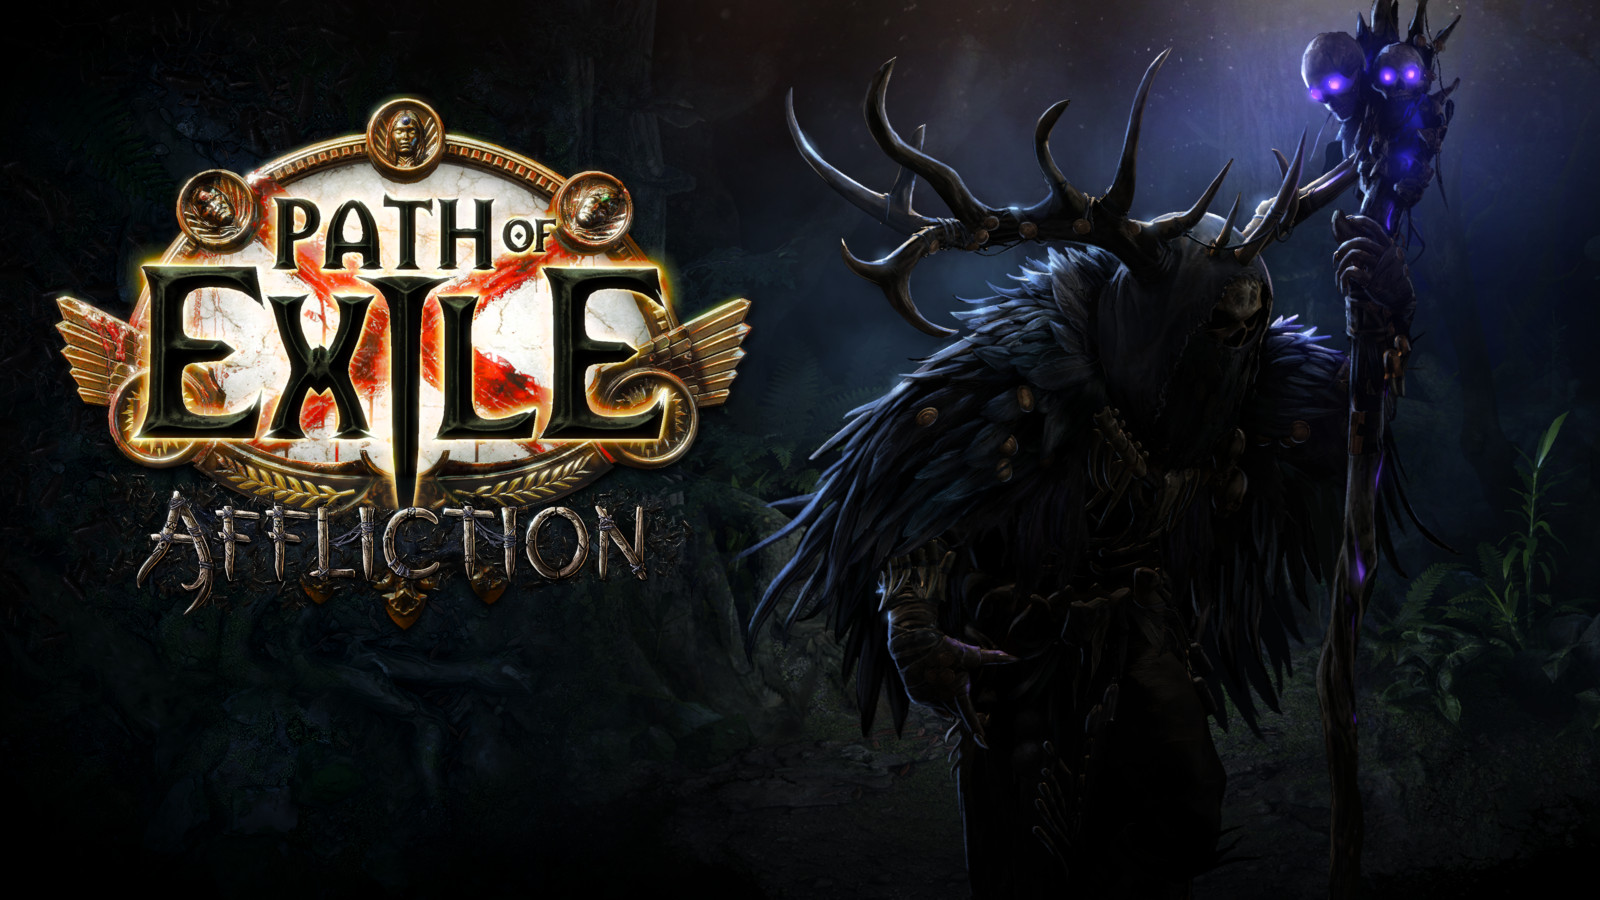 [$ 5.01] Path of Exile Affliction - 50 Divine Orb - PC